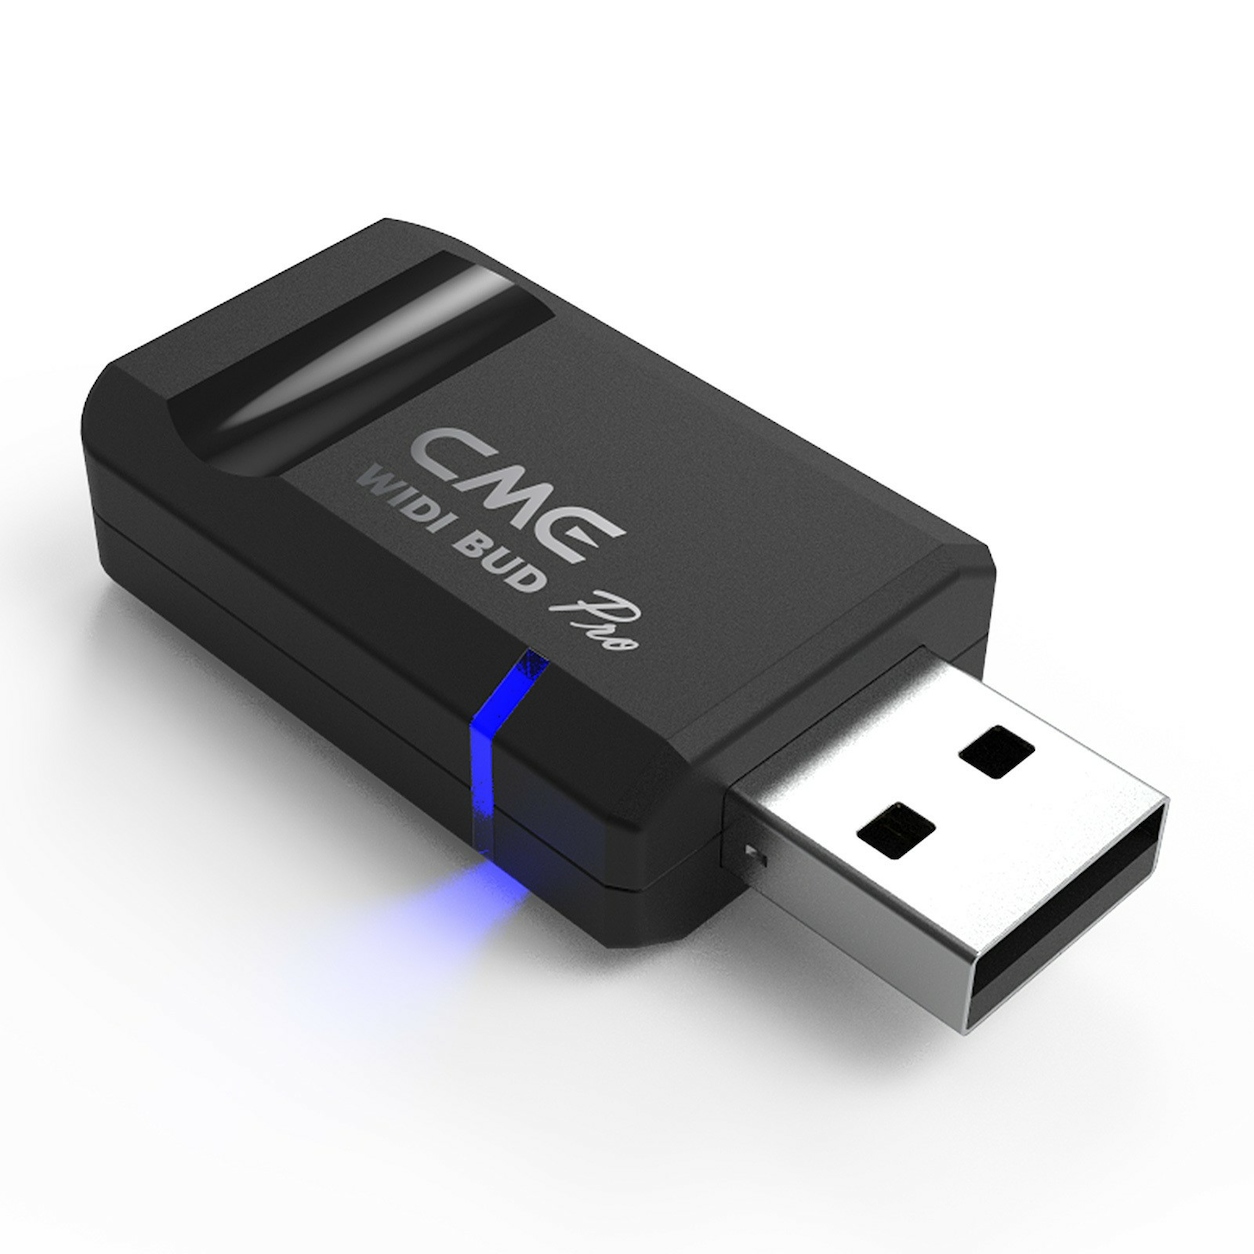 A small USB dongle